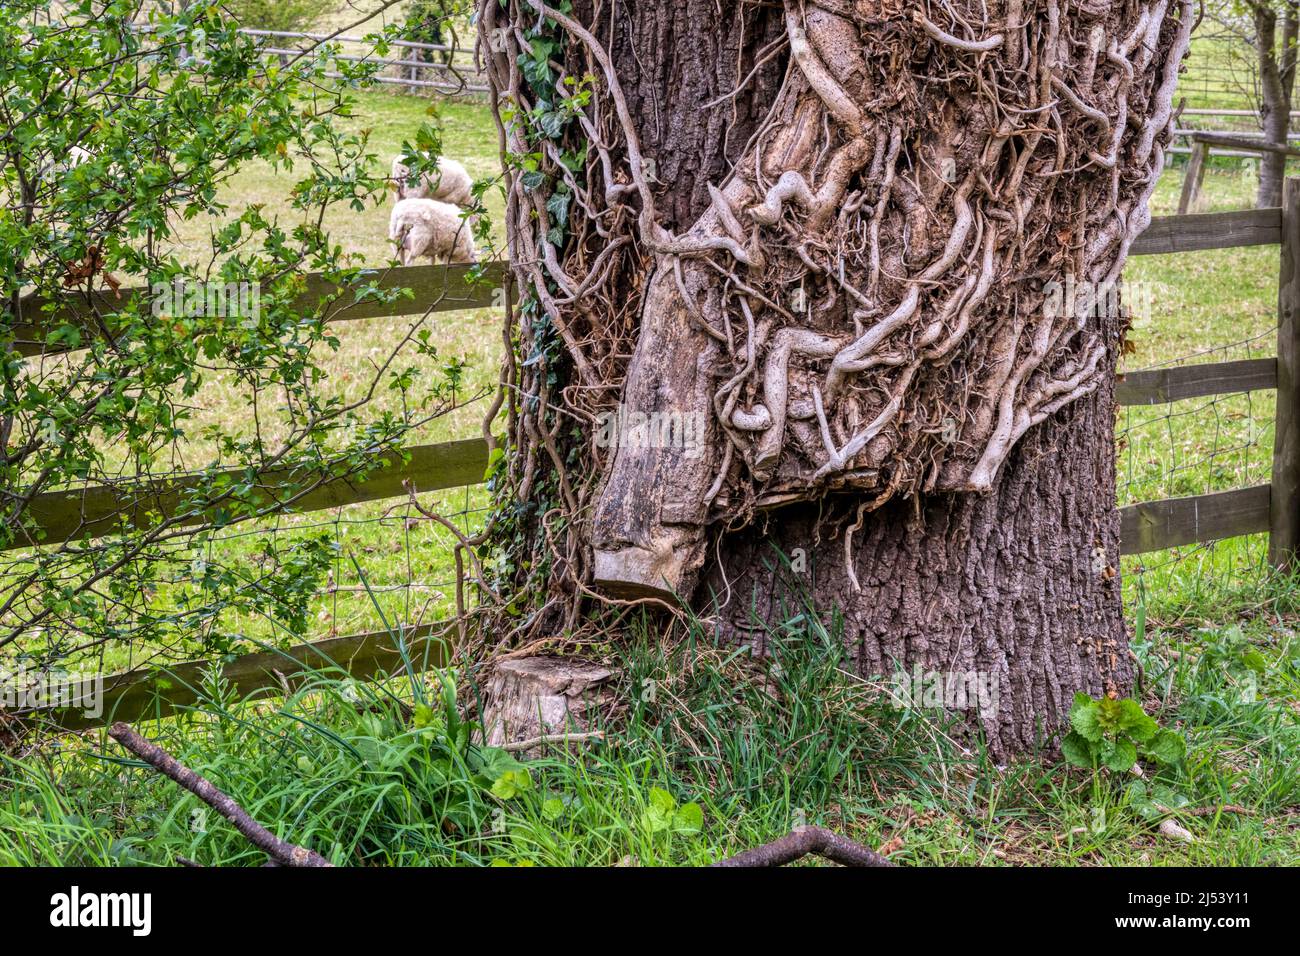 Large ivy stem that has been cut to kill the plant and save its host tree. Stock Photo